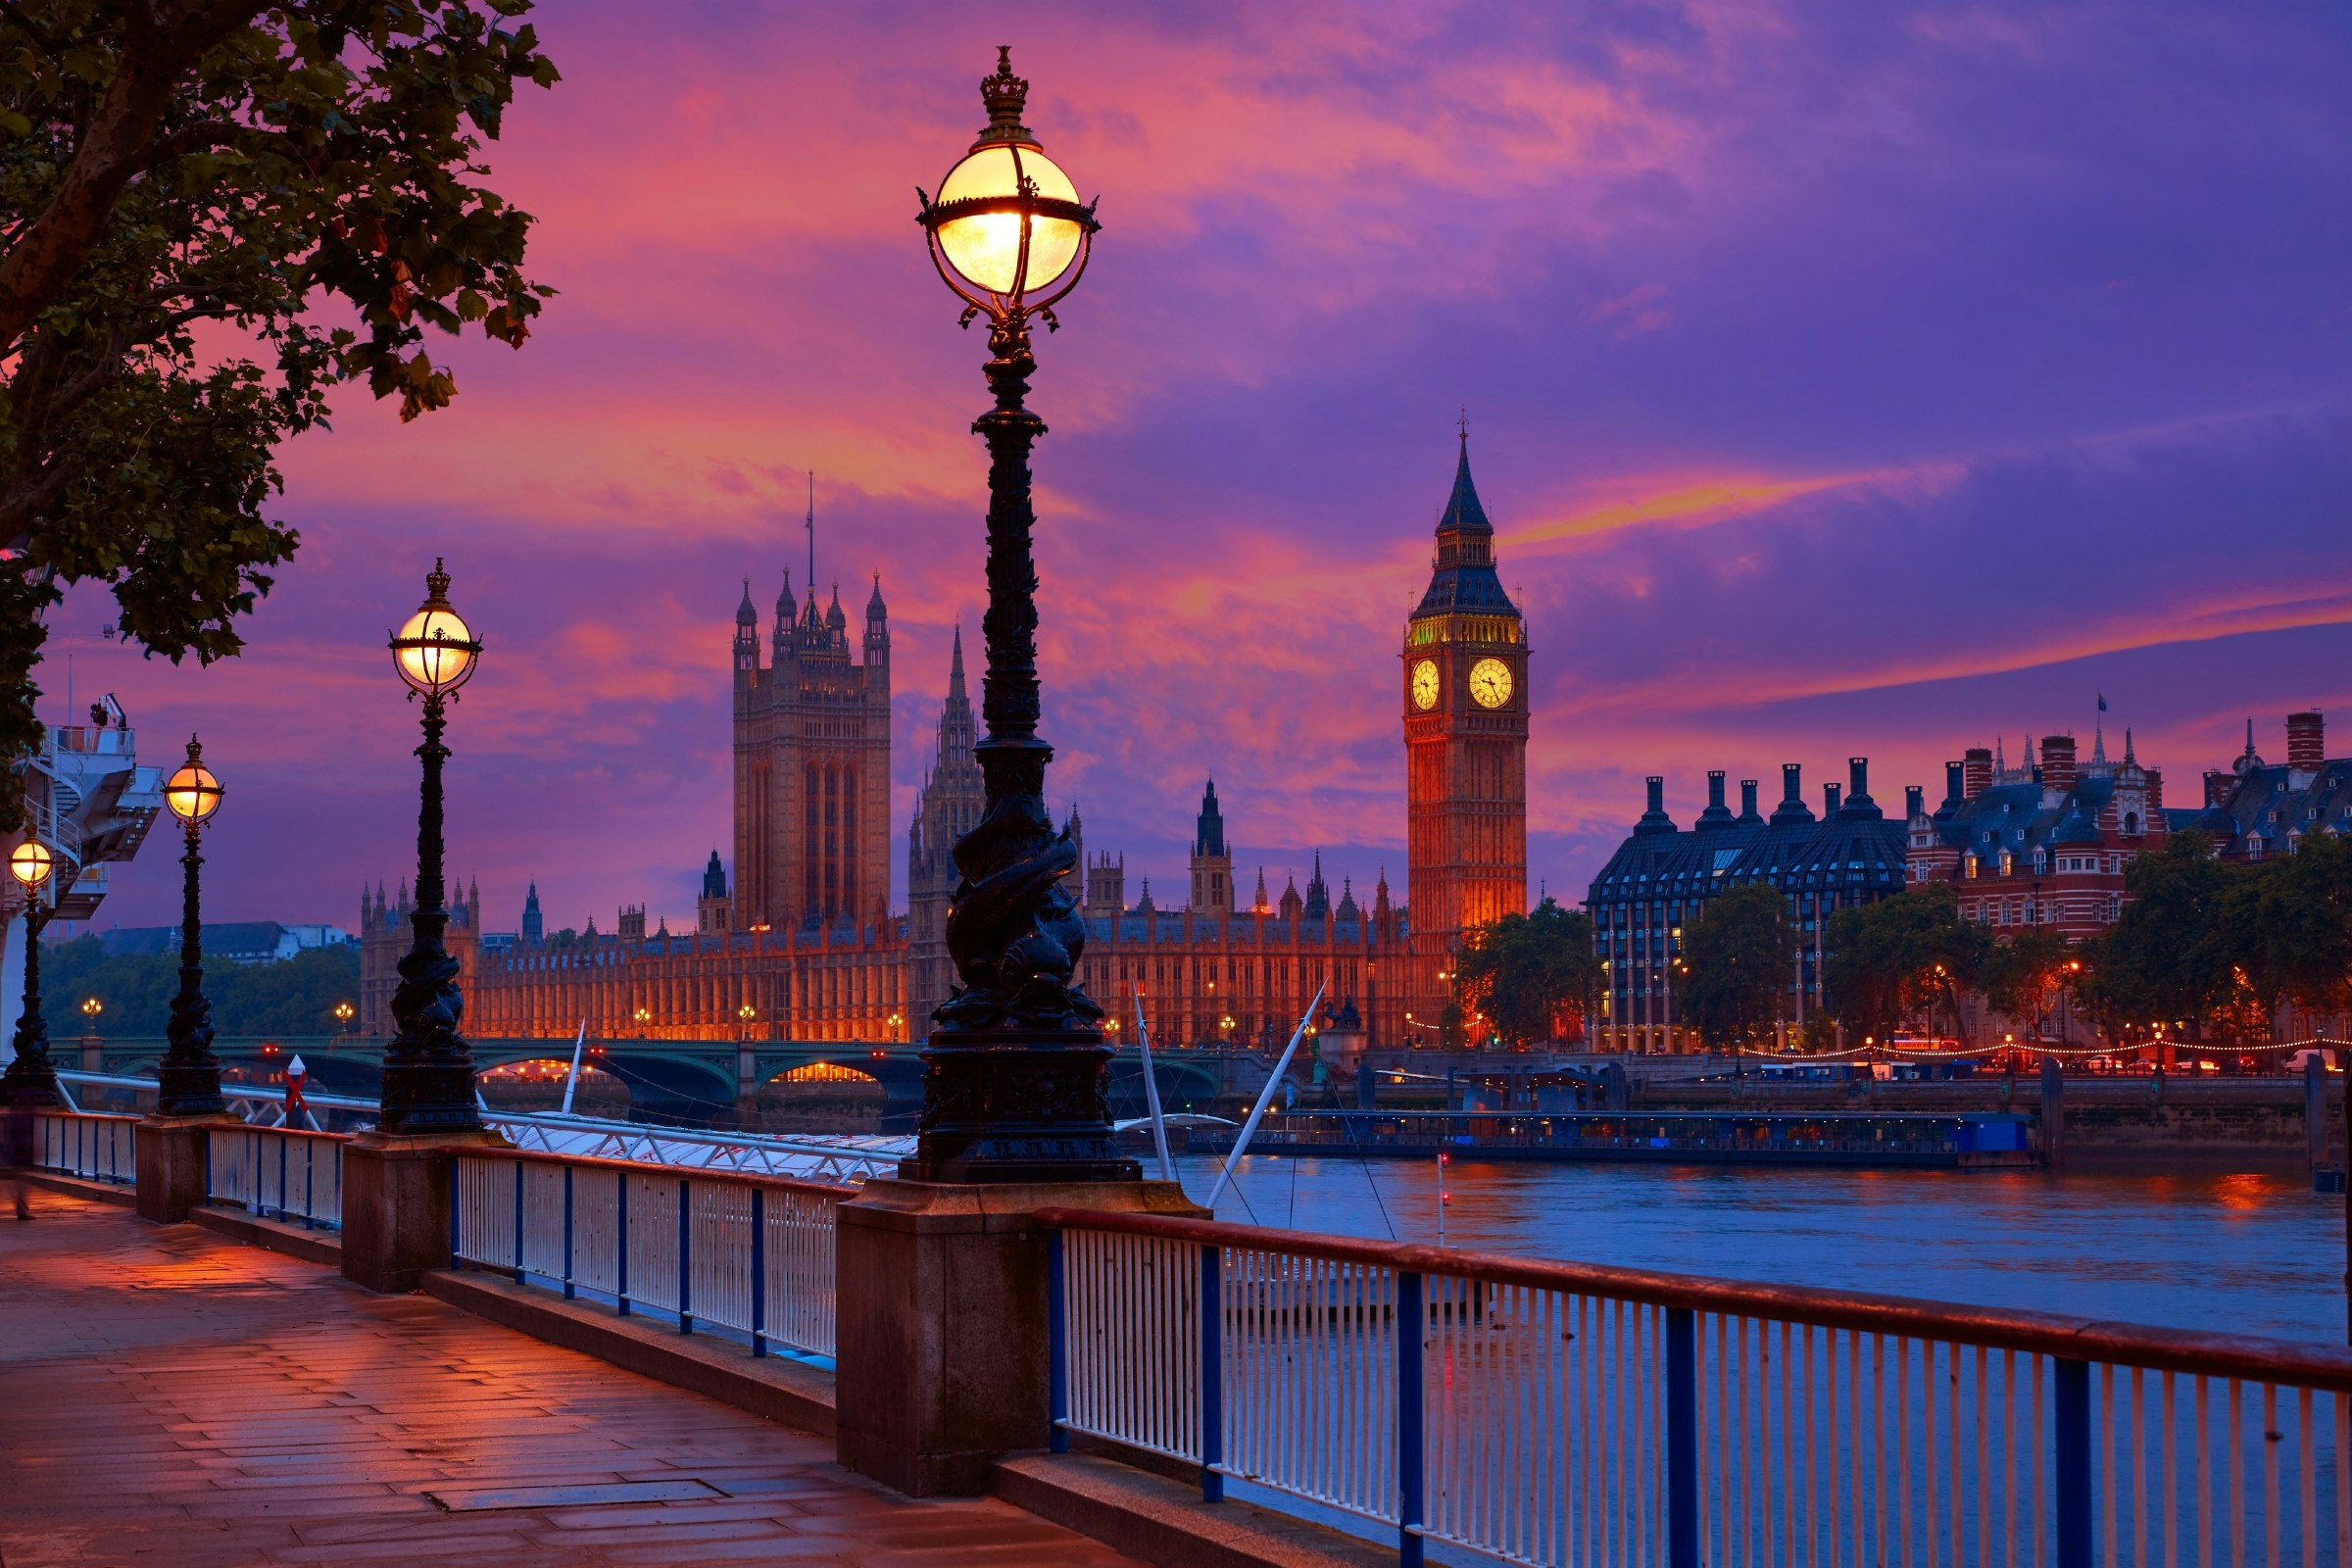 A view of Big Ben and the Houses of Parliament in London from across the River Thames.